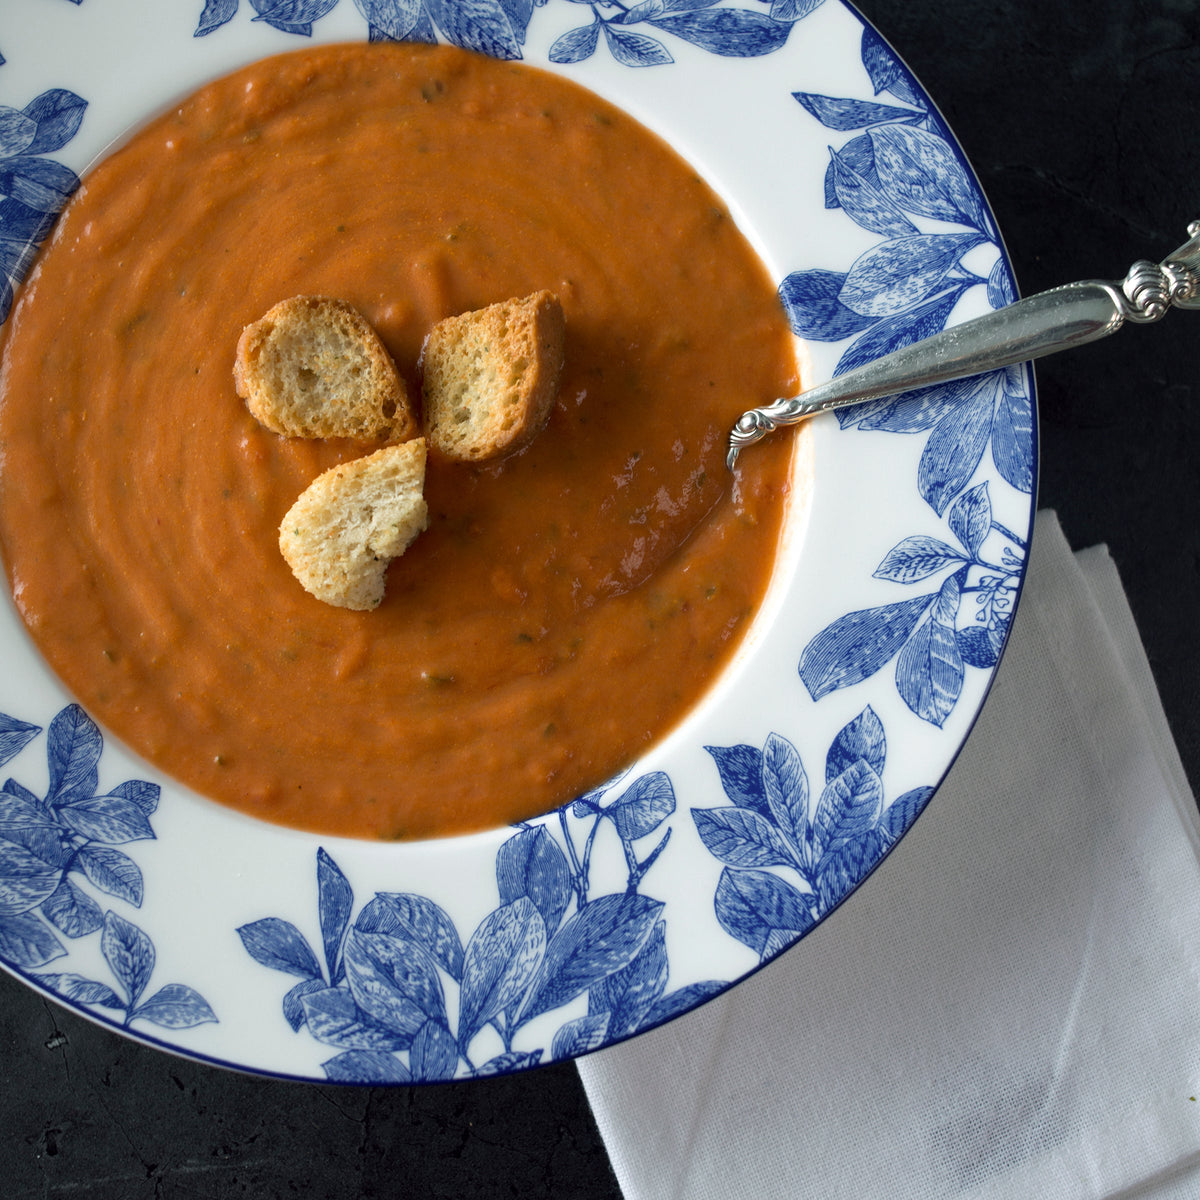 An Arbor Rimmed Soup Bowl of high-fire porcelain from Caskata Artisanal Home cradles a savory tomato soup with three croutons, served on a white plate with blue floral patterns. A silver spoon rests on the edge next to a white napkin. The entire setting is dishwasher safe for easy cleanup.